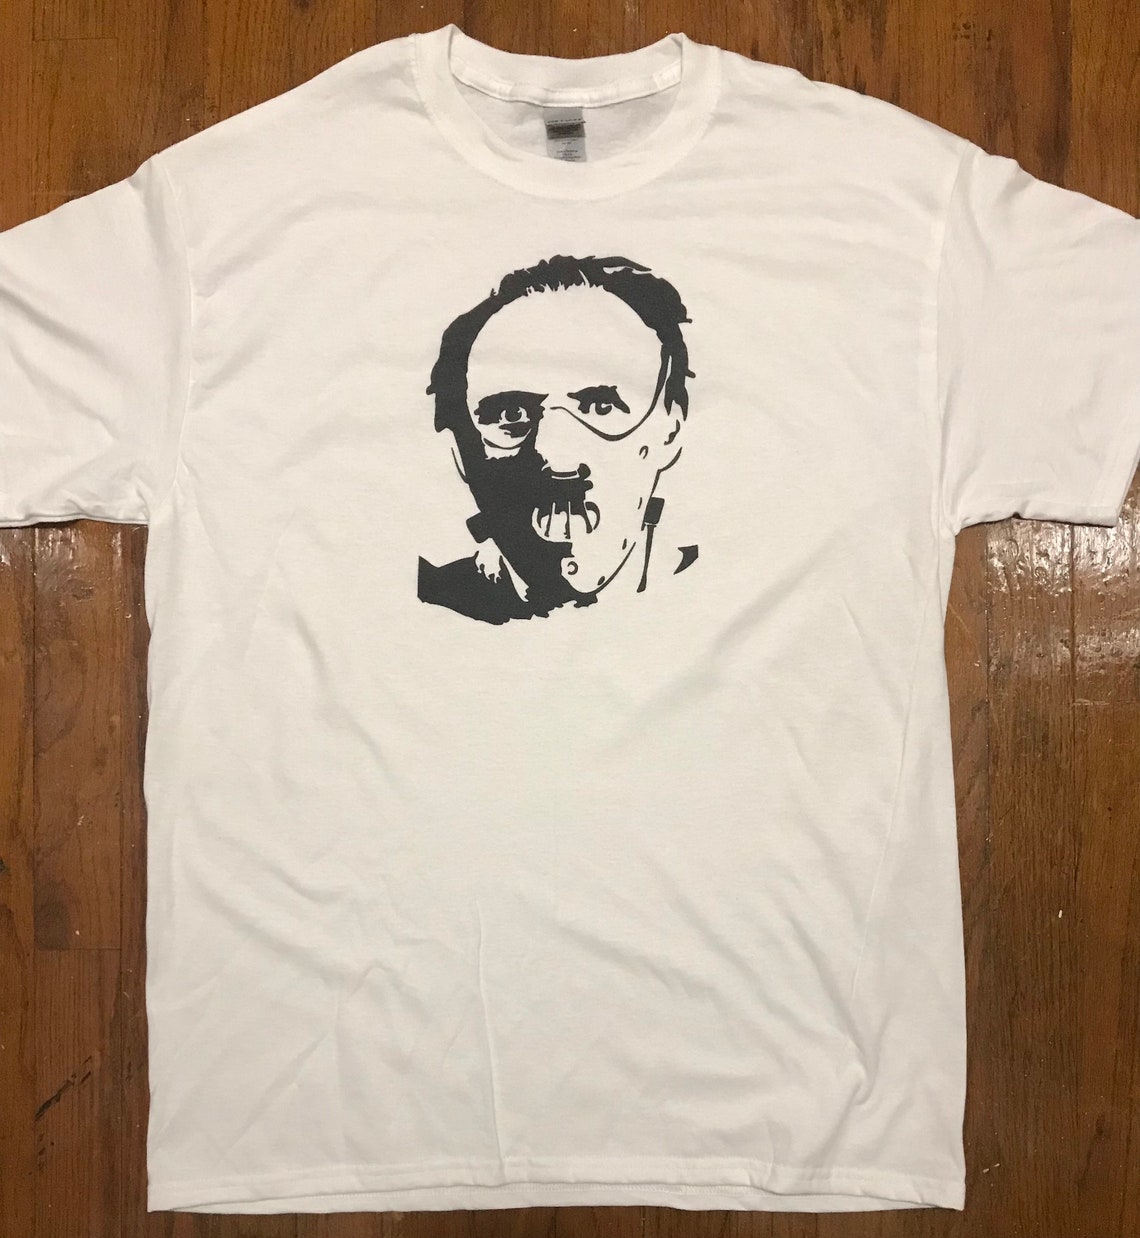 Hannibal Lecter white t-shirt any size | Etsy